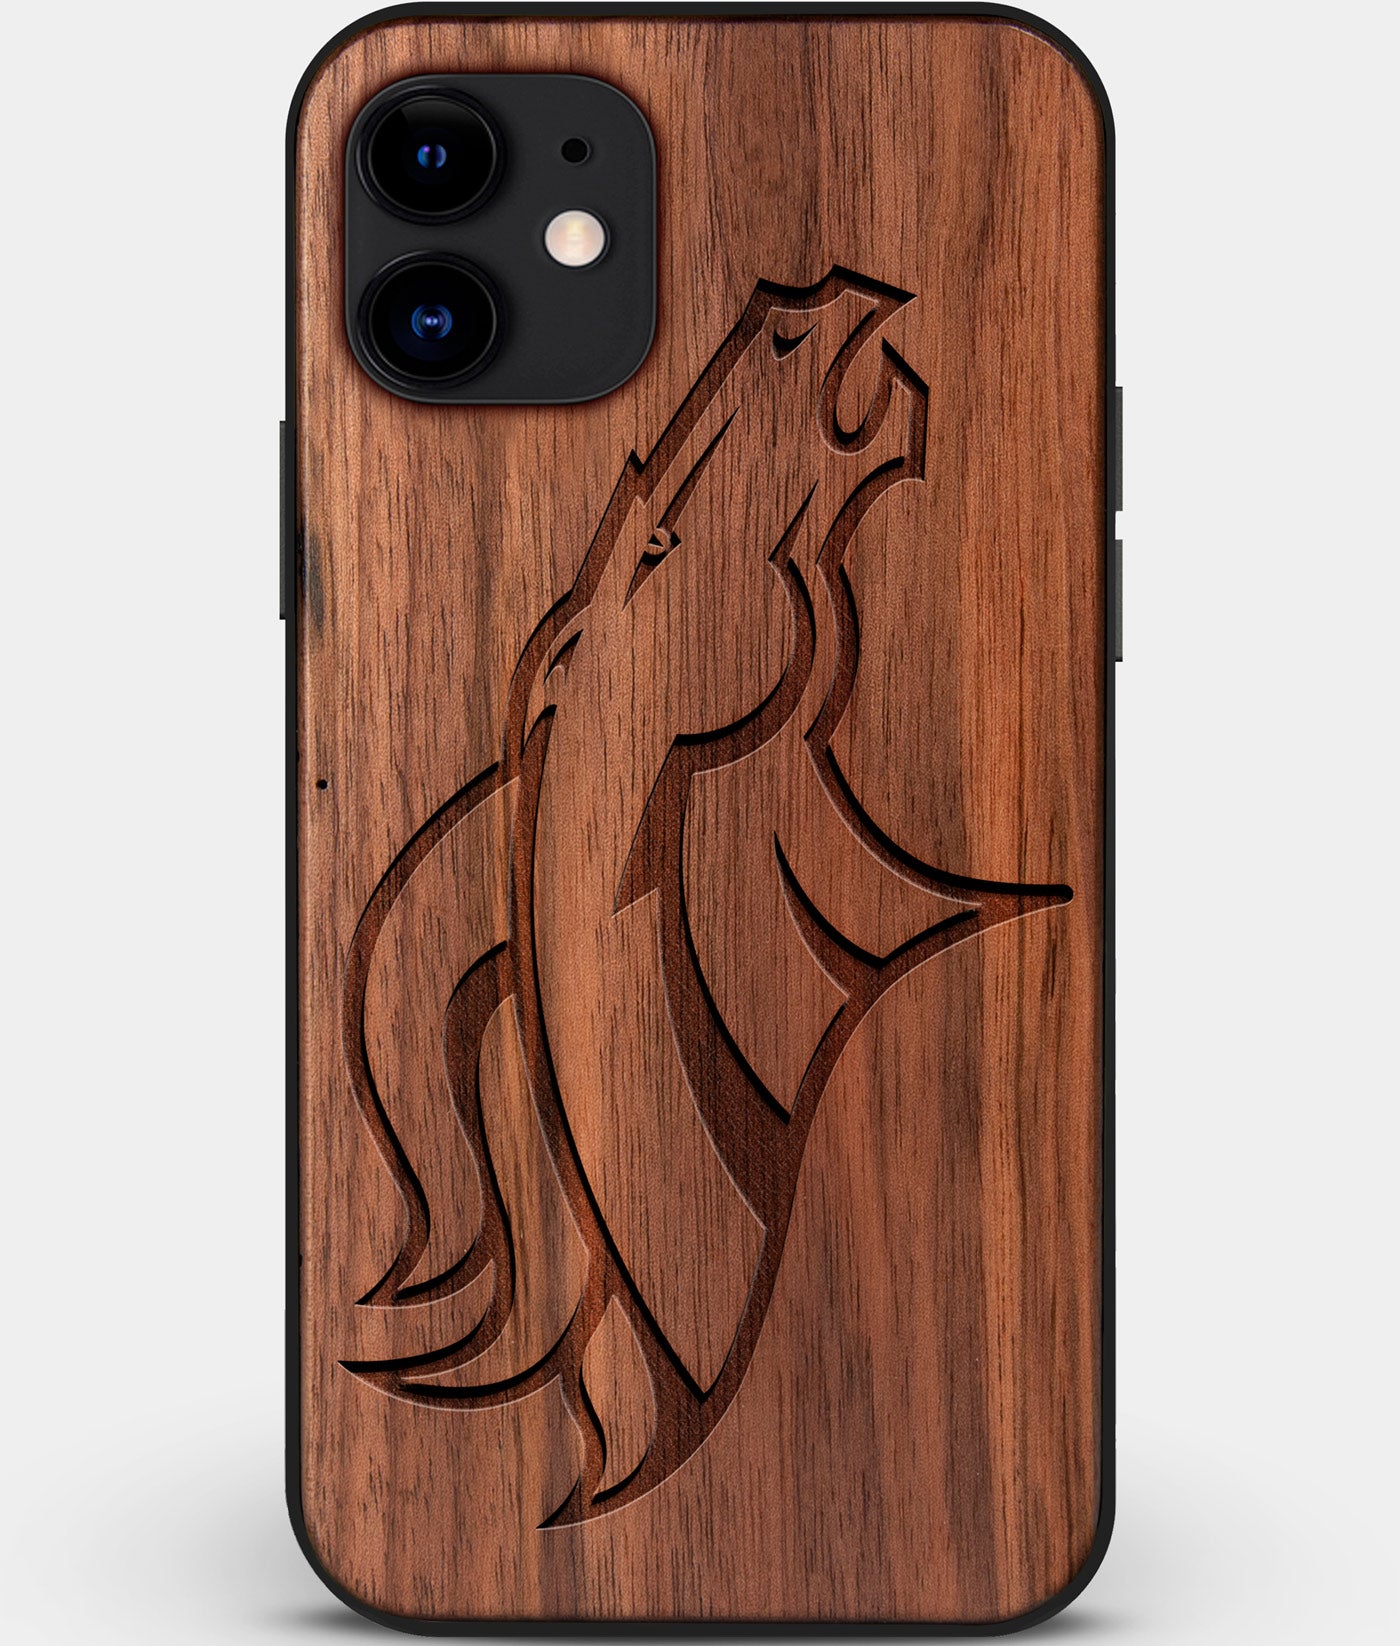 Custom Carved Wood Denver Broncos iPhone 12 Case | Personalized Walnut Wood Denver Broncos Cover, Birthday Gift, Gifts For Him, Monogrammed Gift For Fan | by Engraved In Nature